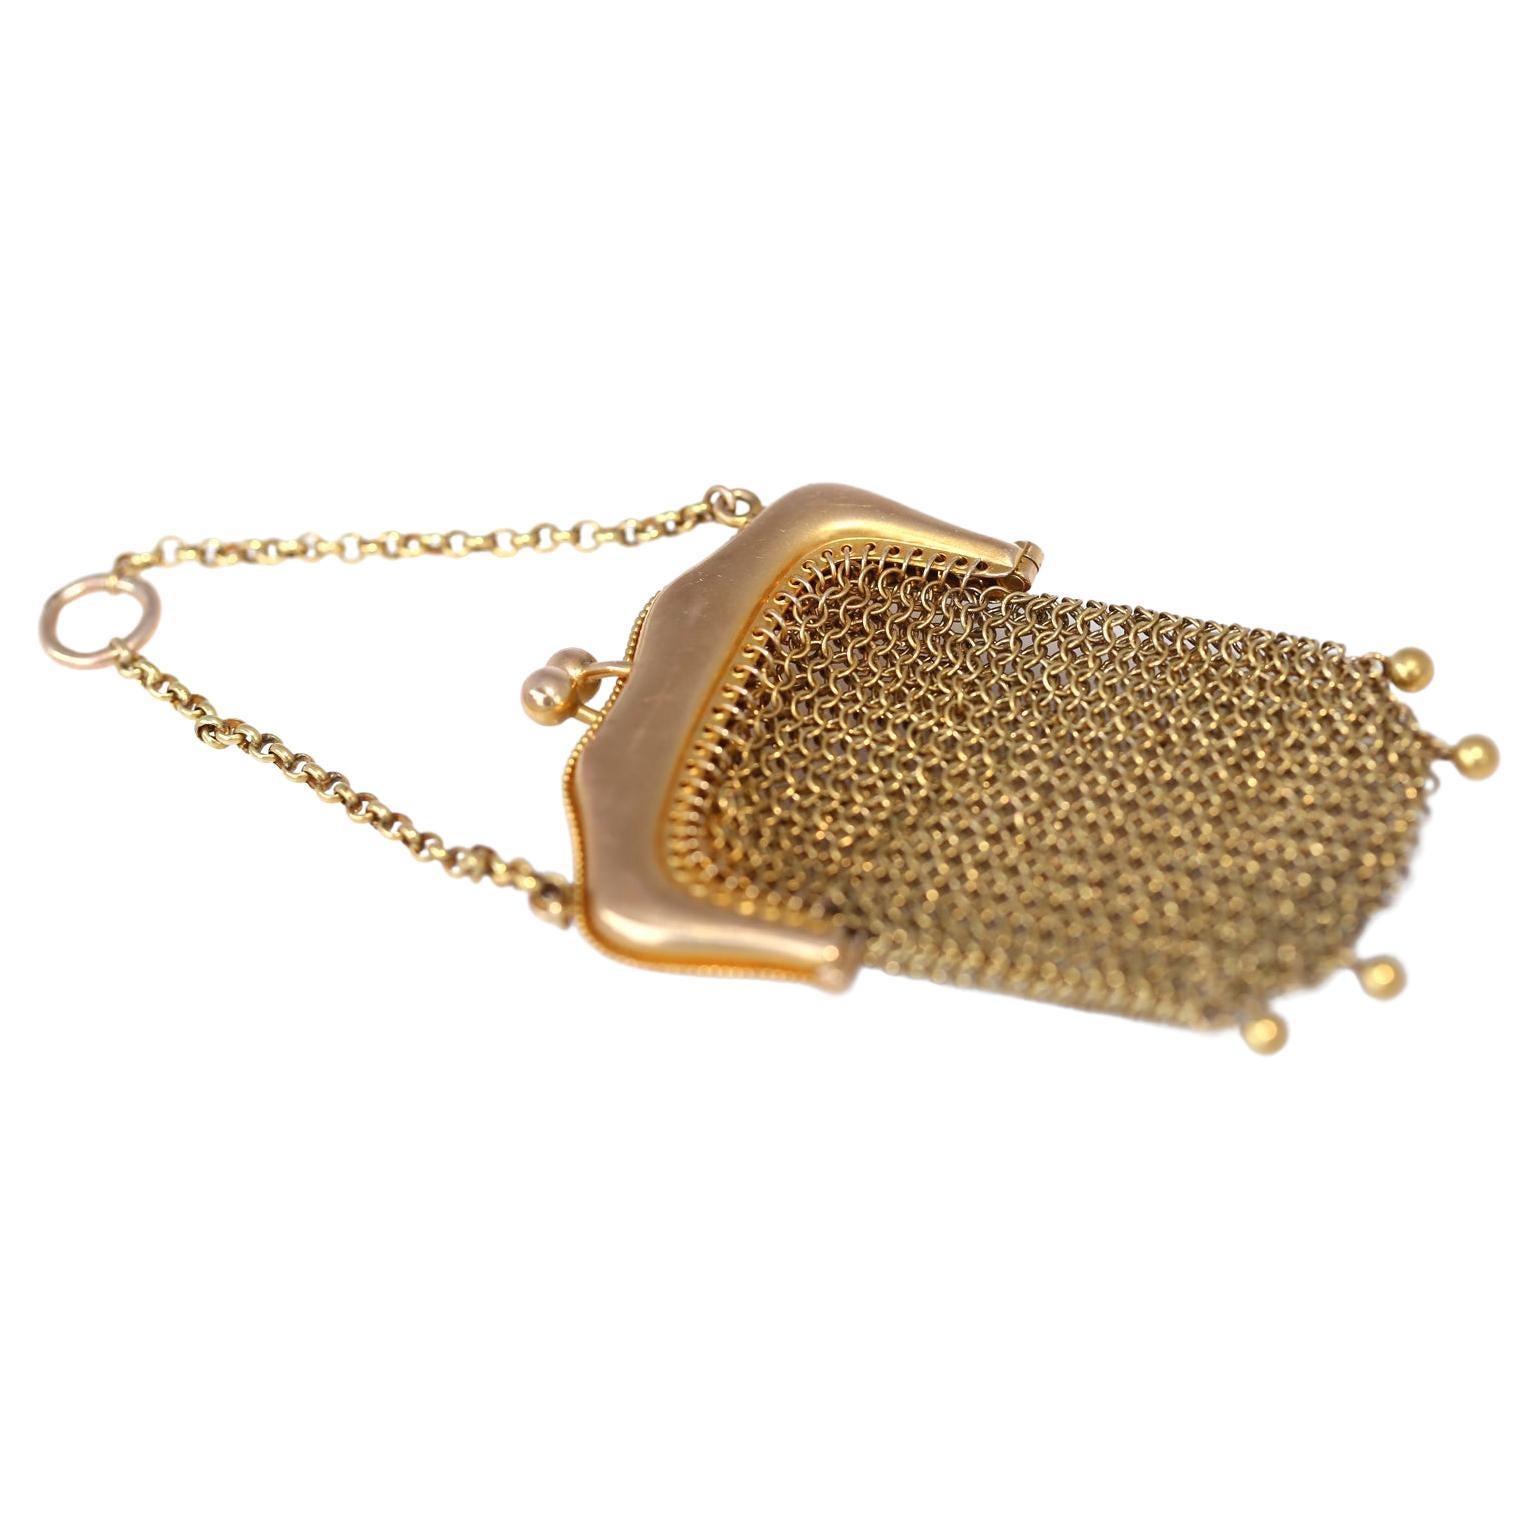 VINTAGE Gold Tone and Studded, Mesh, Clutch Purse. — http